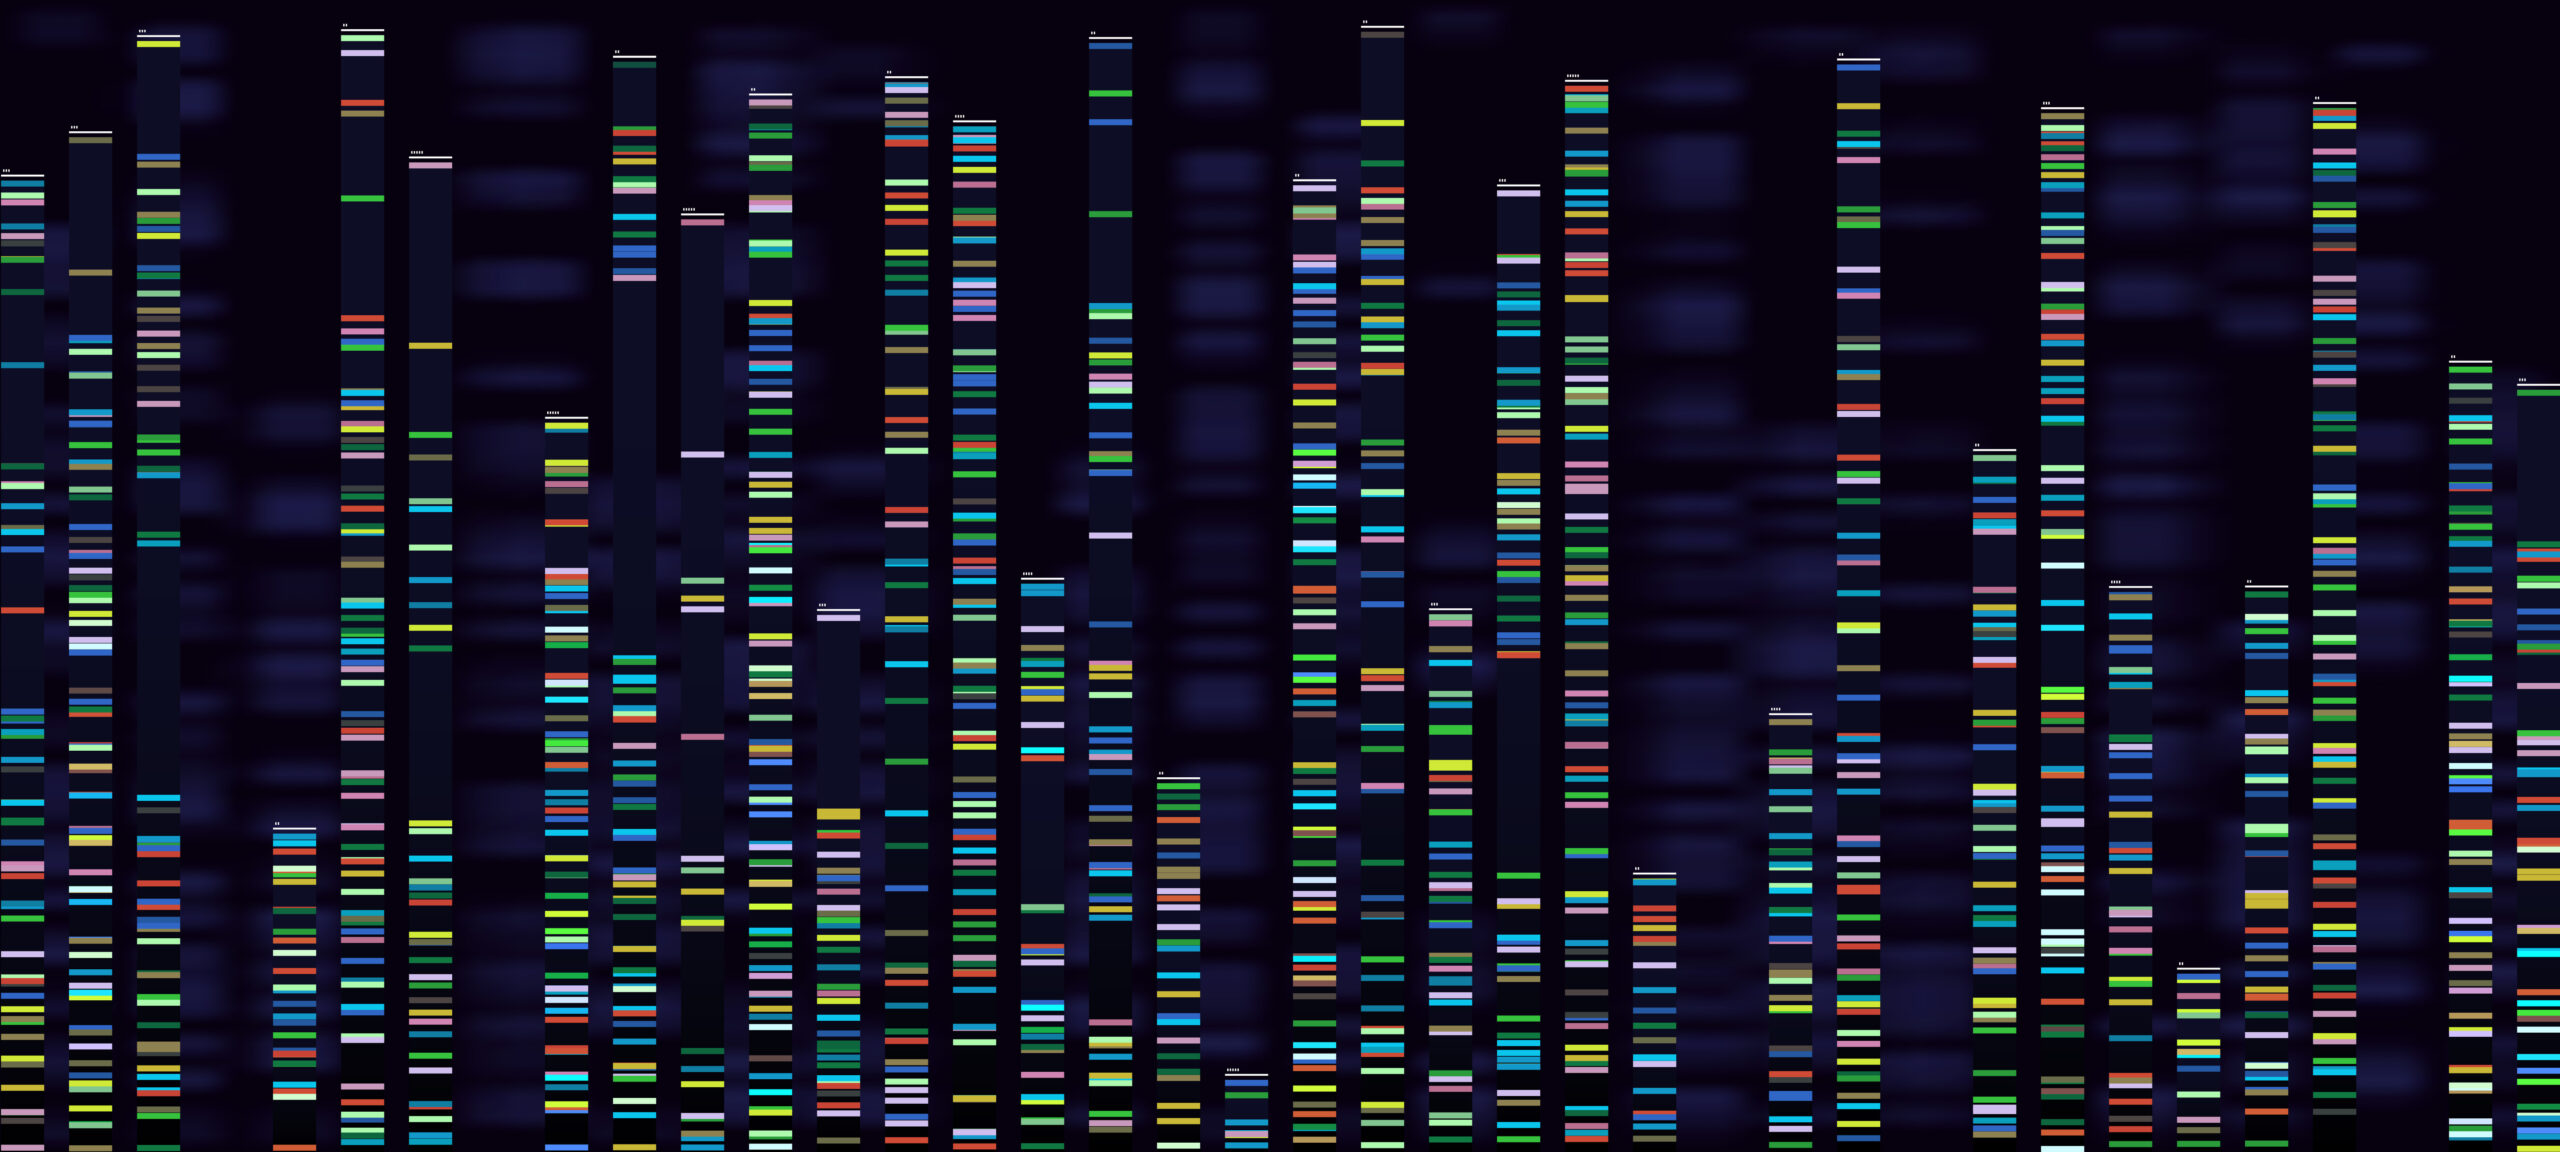 Whole Genome Sequencing Helps Detect Increased Risk for Malignant Tumors in Children with Birth Defects